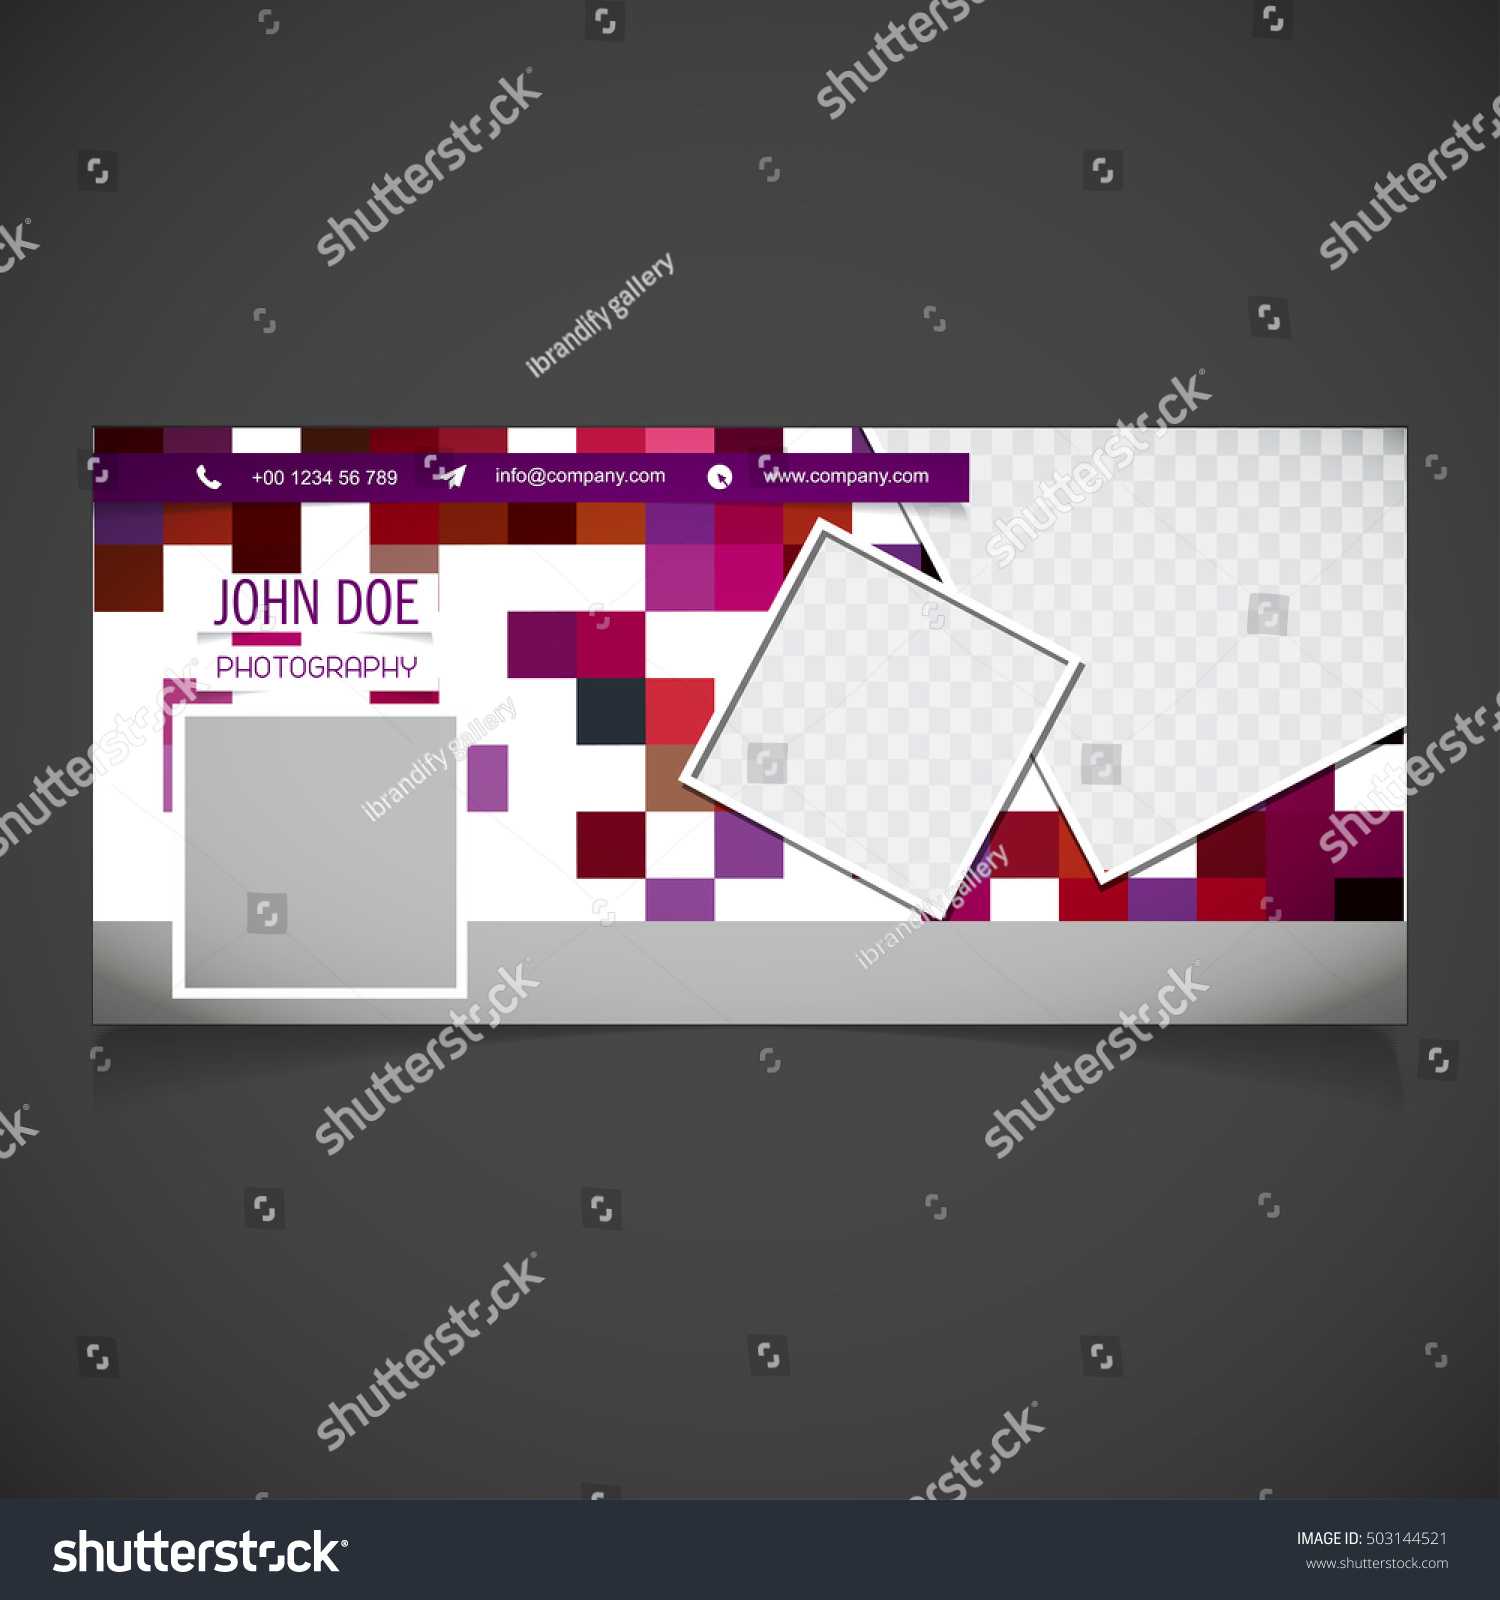 Creative Photography Banner Template Place Image Stock Within Photography Banner Template